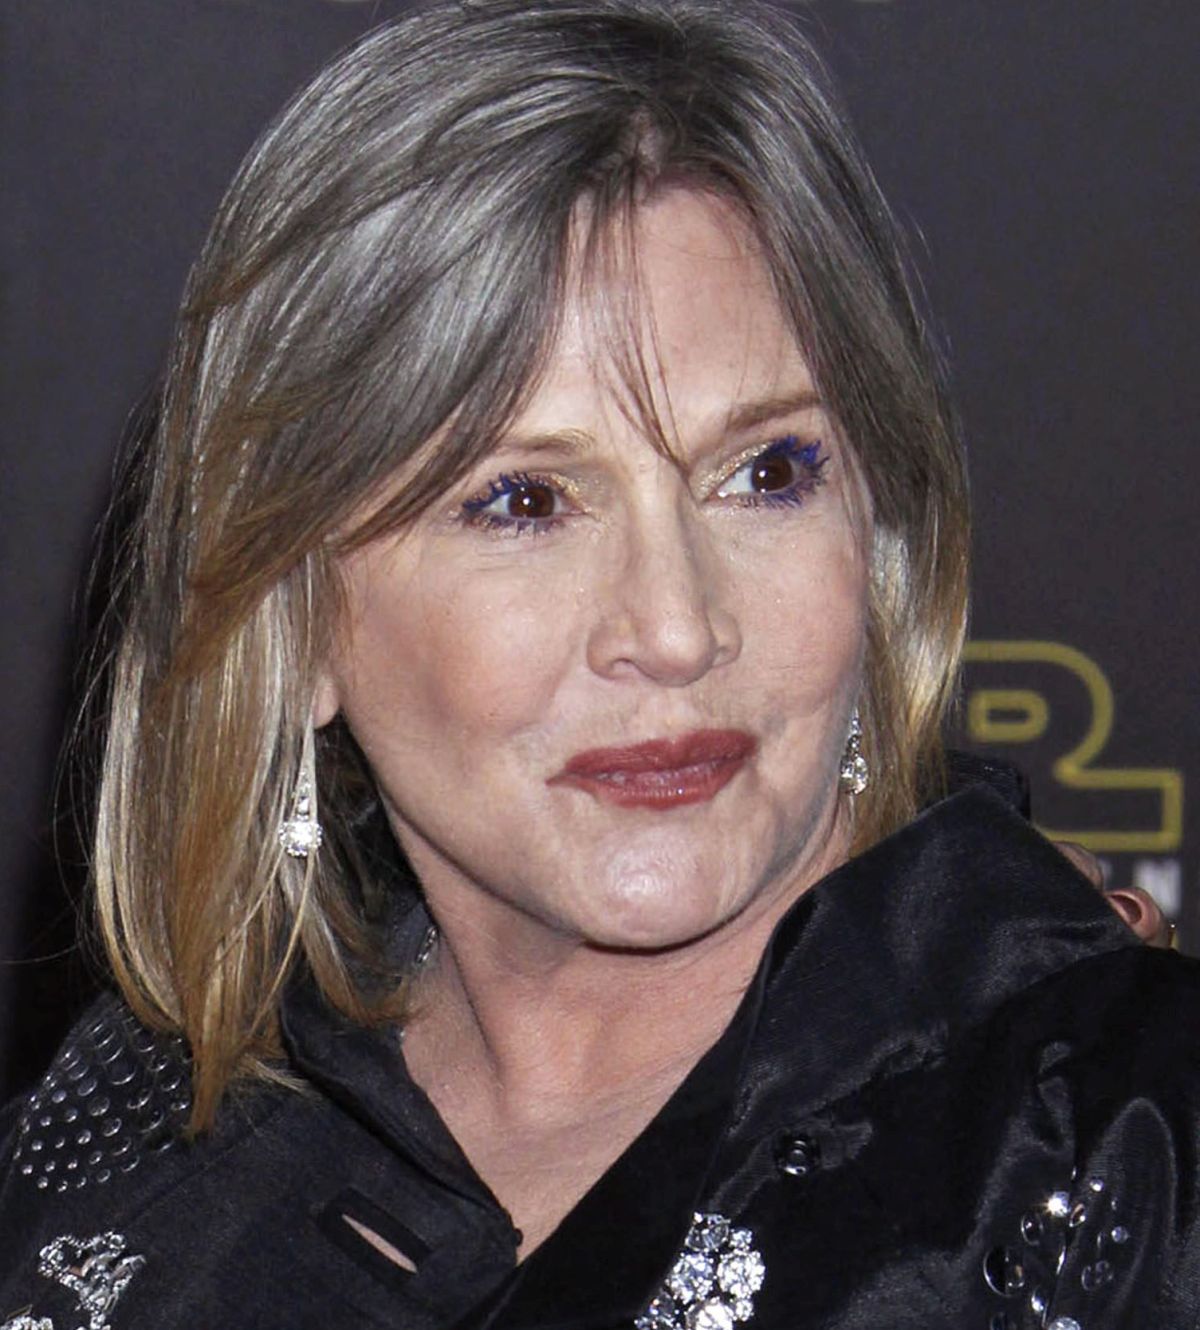 epa05689536 (FILE) - A file picture dated 14 December 2015 shows US actress Carrie Fisher attending the premiere of 'Star Wars: The Force Awakens' at the TCL Theatre in Hollywood, California, USA. According to media reports, Carrie Fisher has died aged 60 in Los Angeles on 27 December 2016, citing her daughter's publicist.  EPA/JIMMY MORRISS